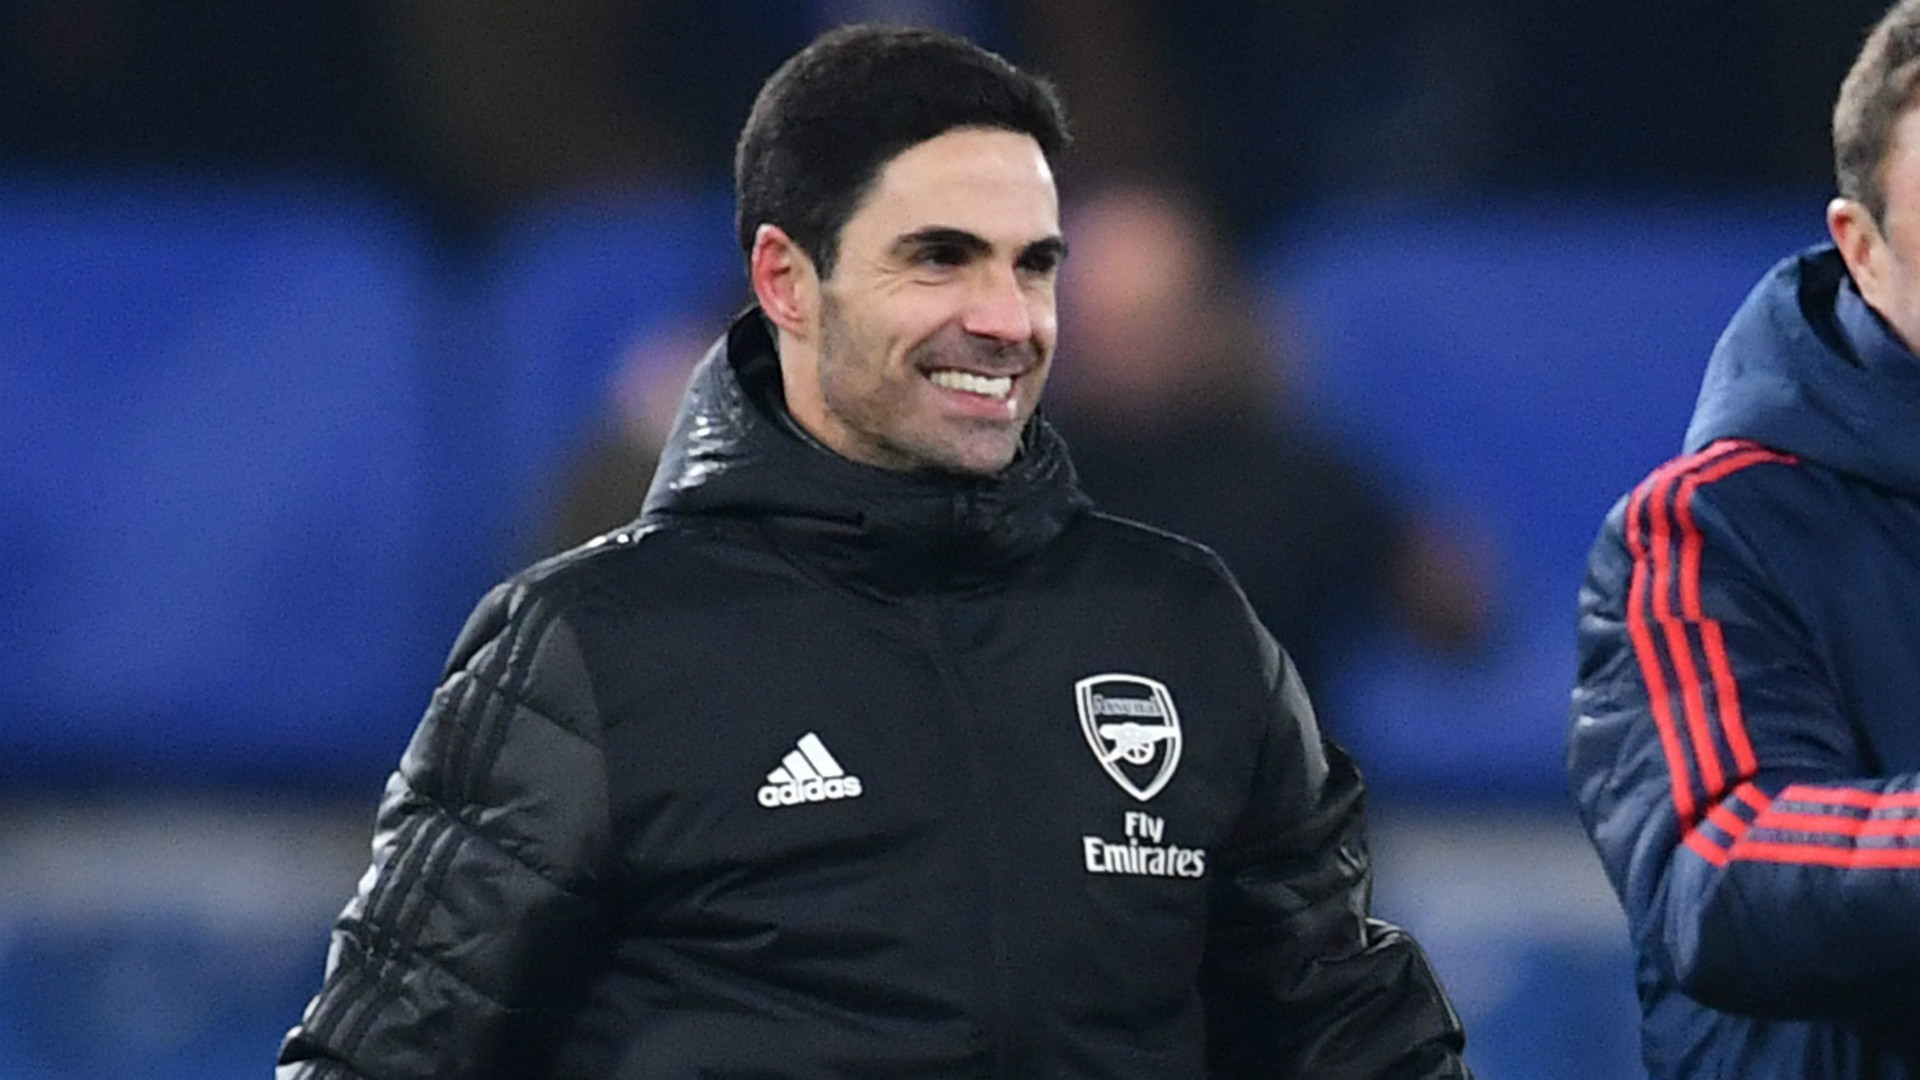 'Yes, yes, Partey incoming': Some Arsenal fans excited by what Arteta has said - Bóng Đá